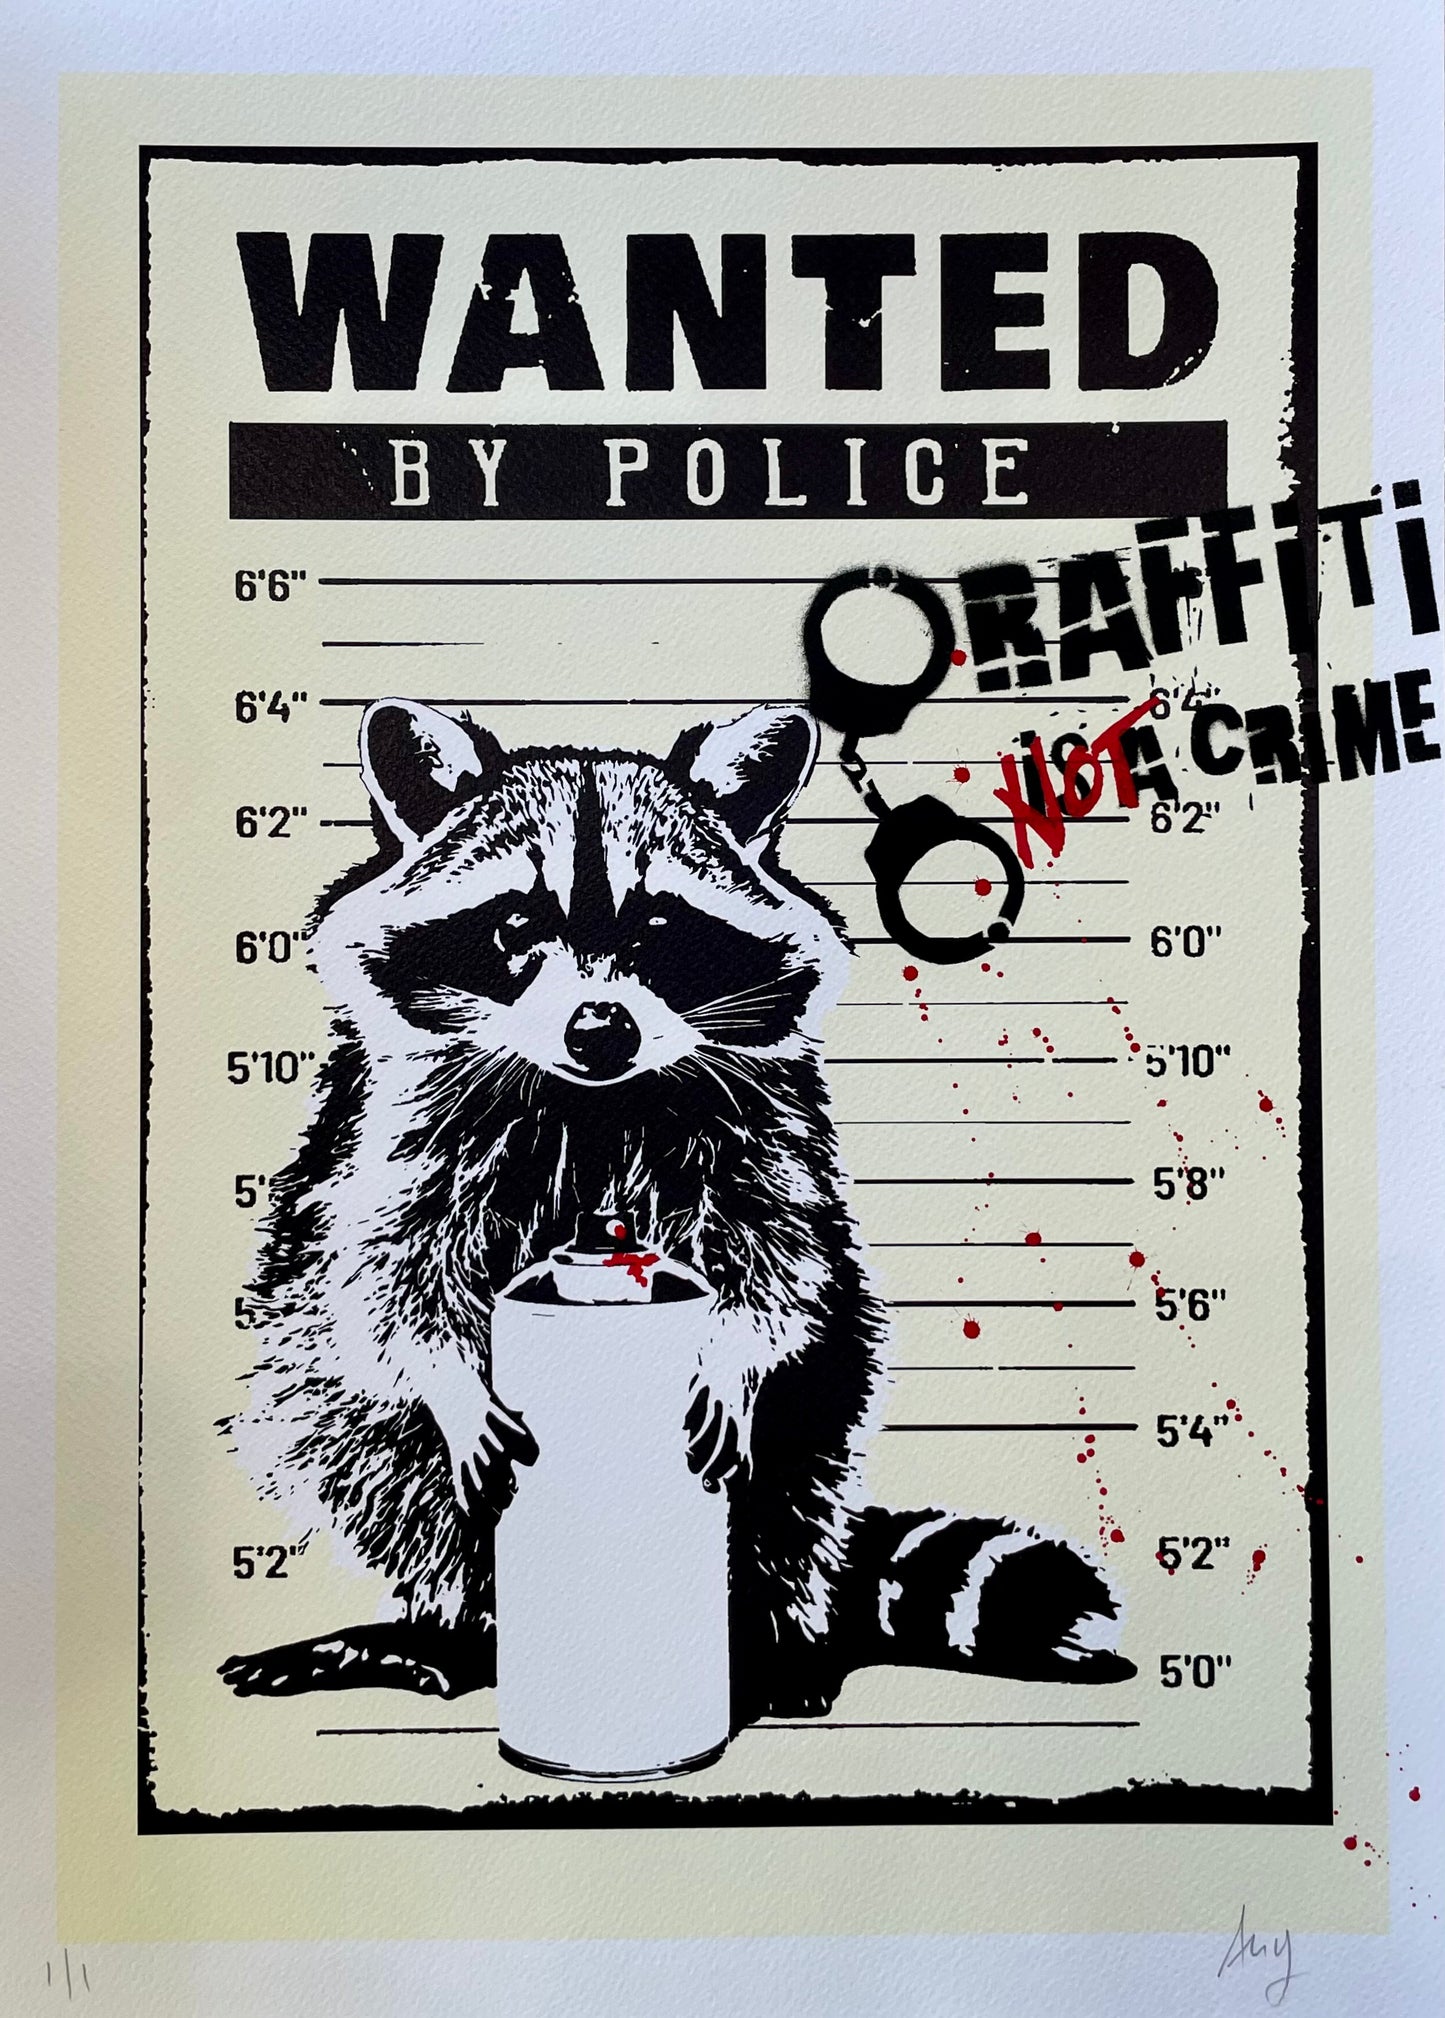 WANTED BY POLICE GRAFFITI IS NOT A CRIME